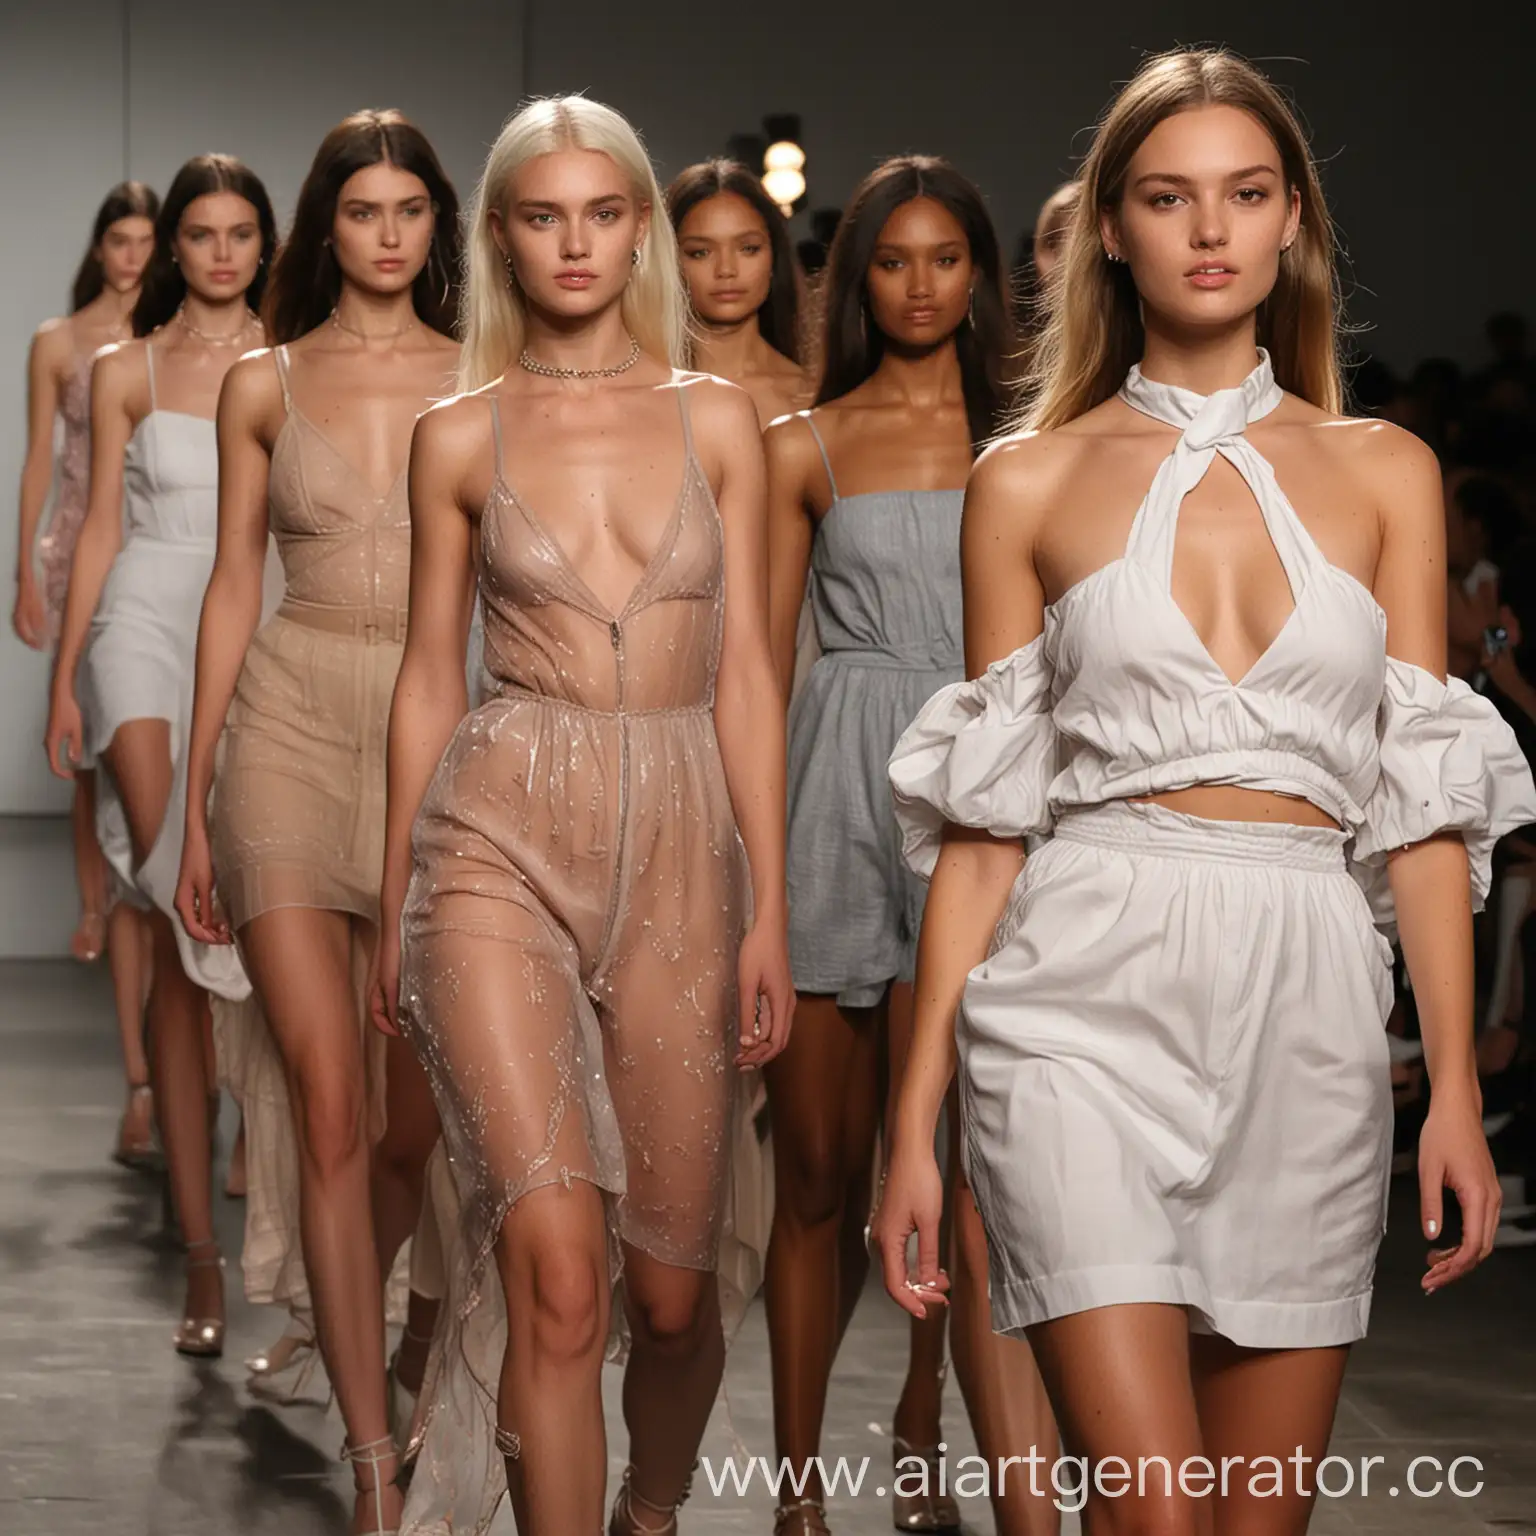 Models walk the runway during New York Fashion Week, showcasing the latest trends.